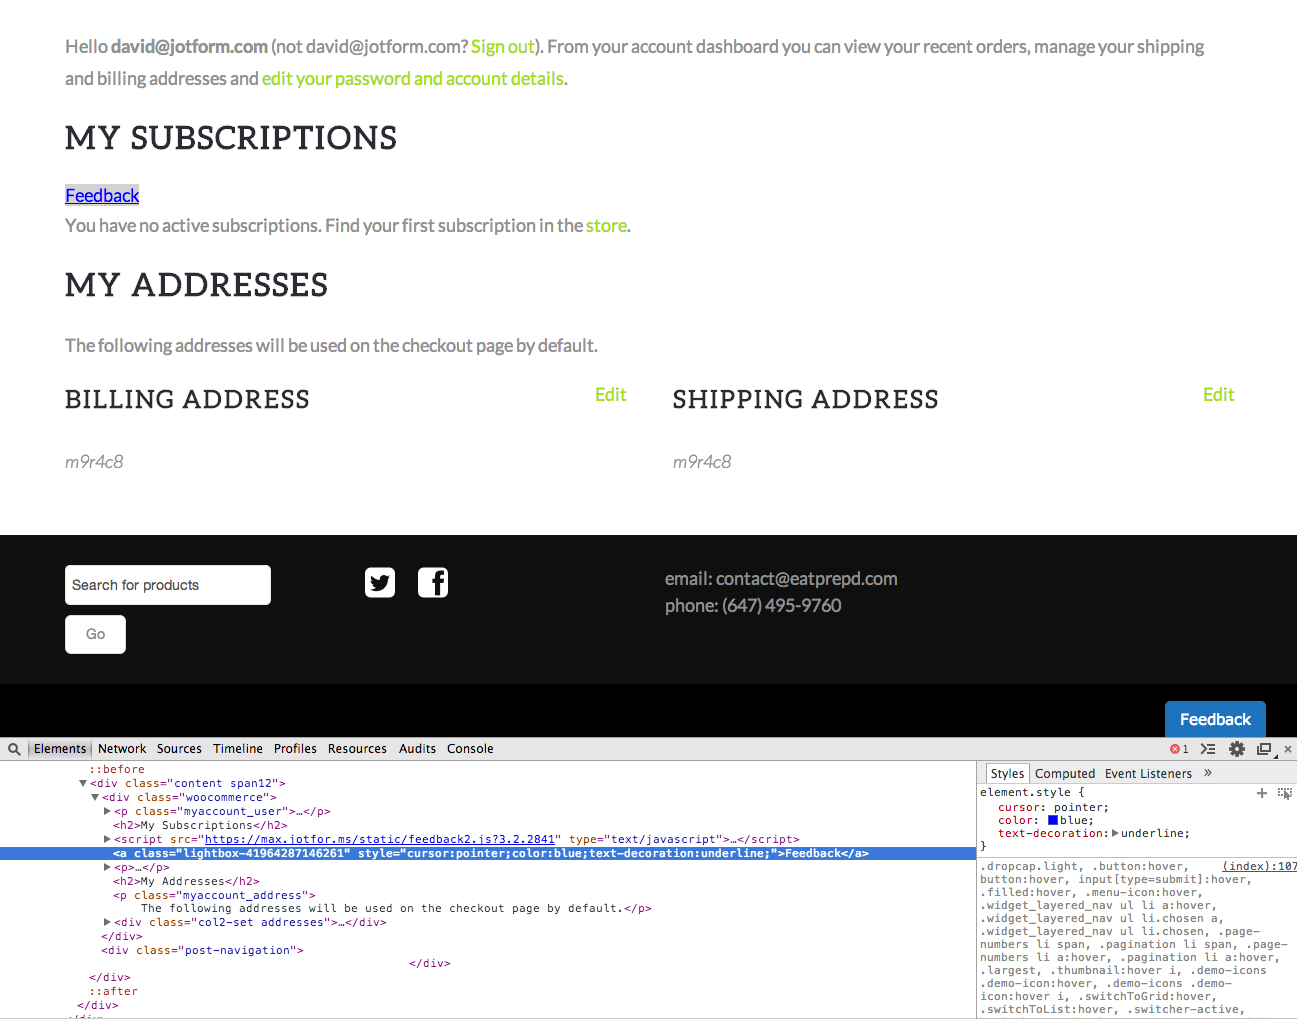 Embed code for a lightbox form not working on php page on wordpress Image 1 Screenshot 20